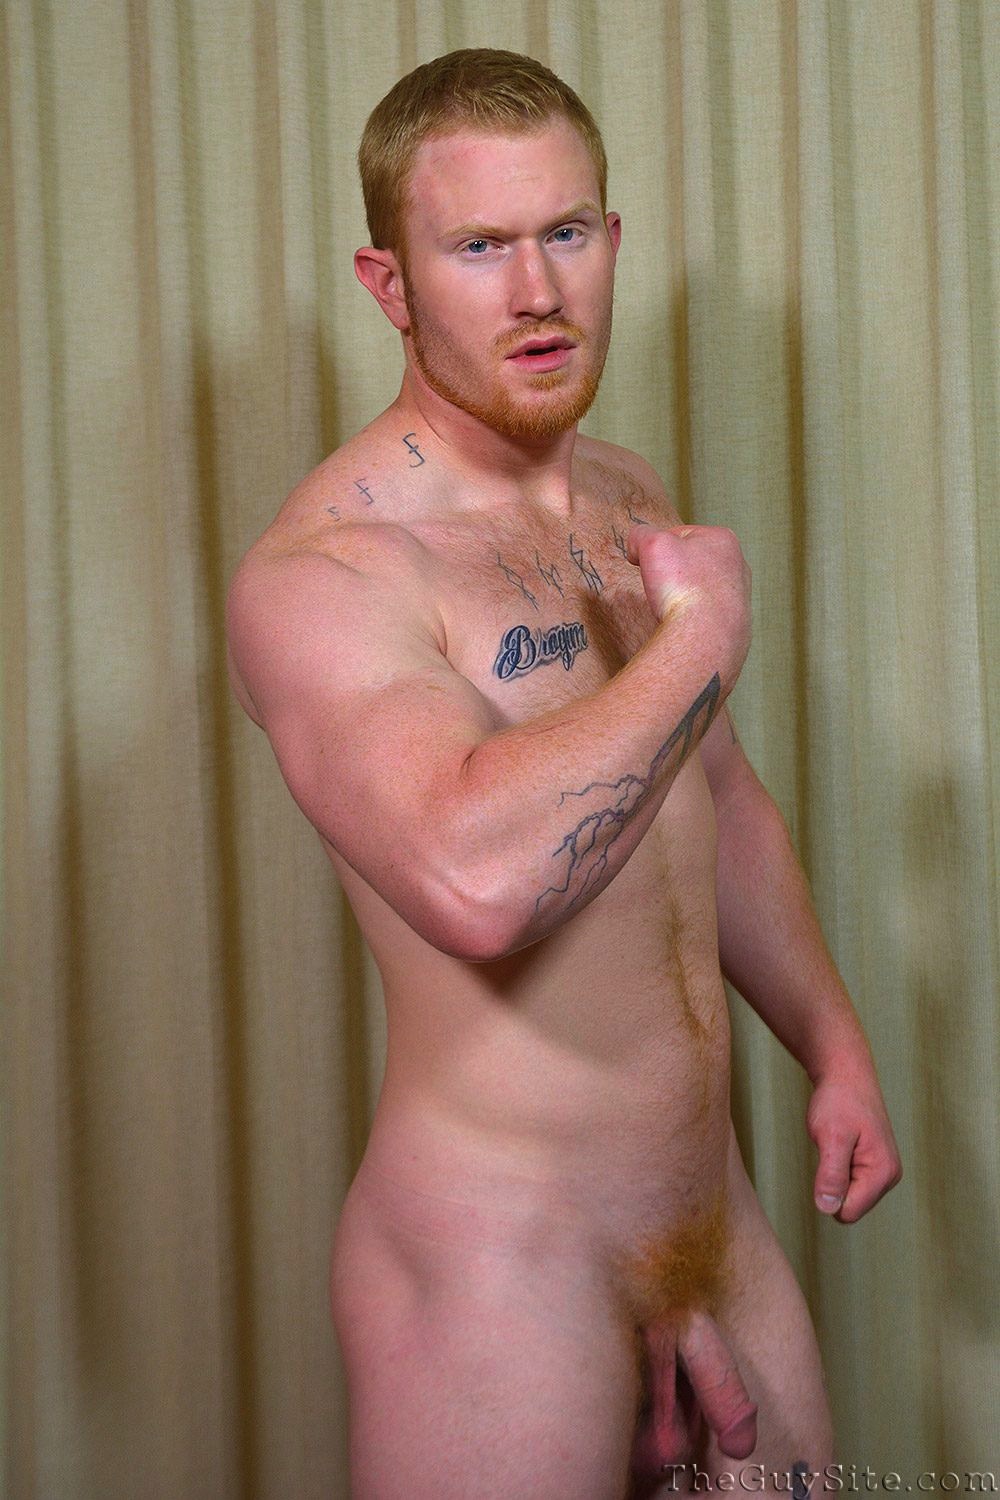 Muscular redhead Colby bottoms for Chance in a gay porn scene for The Guy Site.